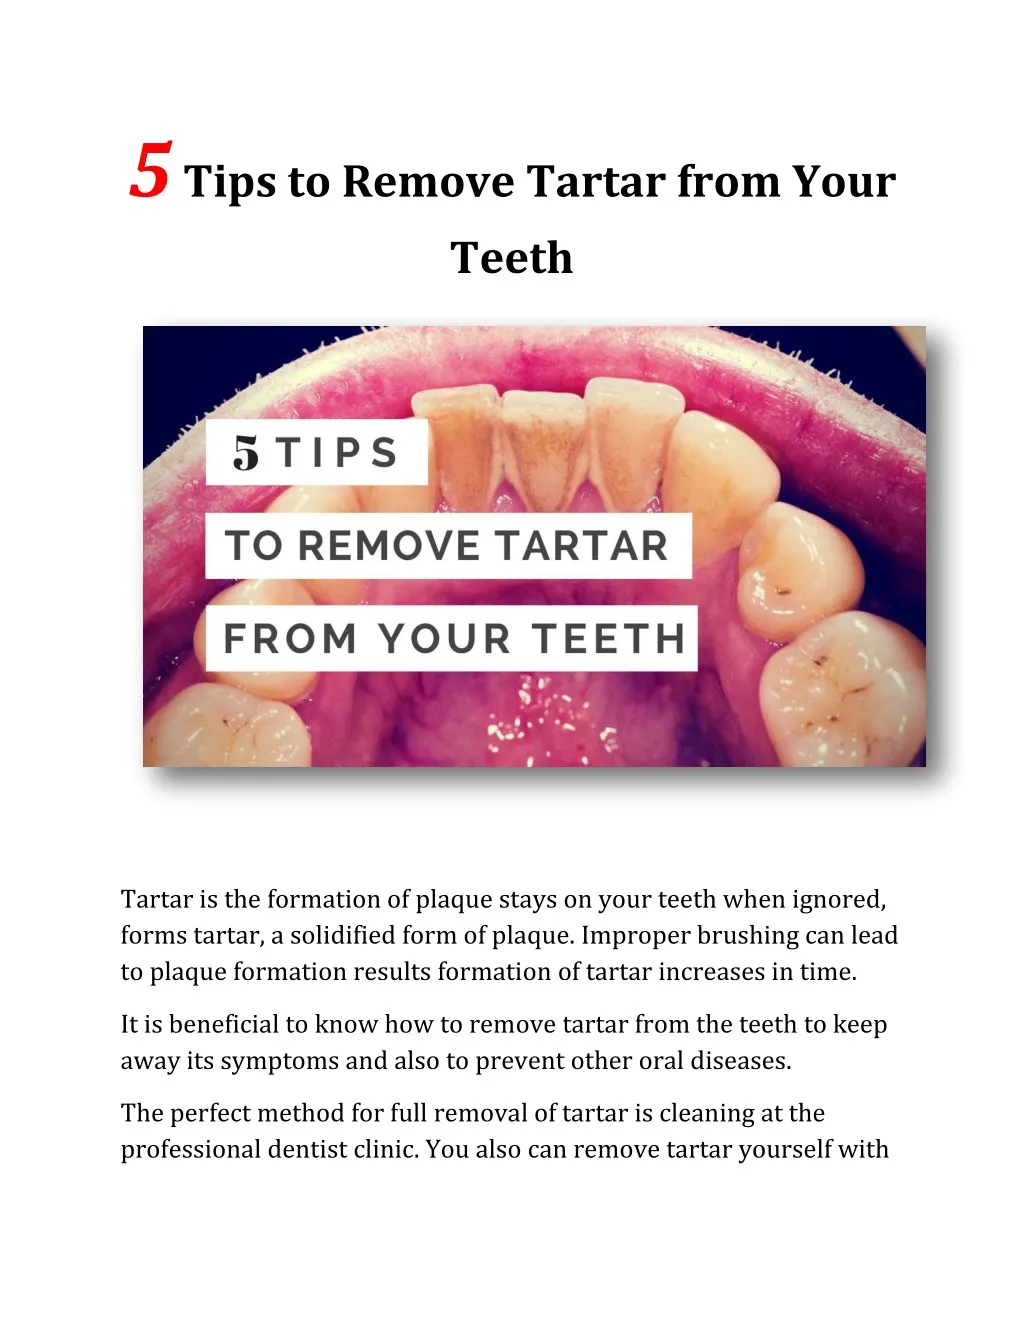 5 tips to remove tartar from your teeth